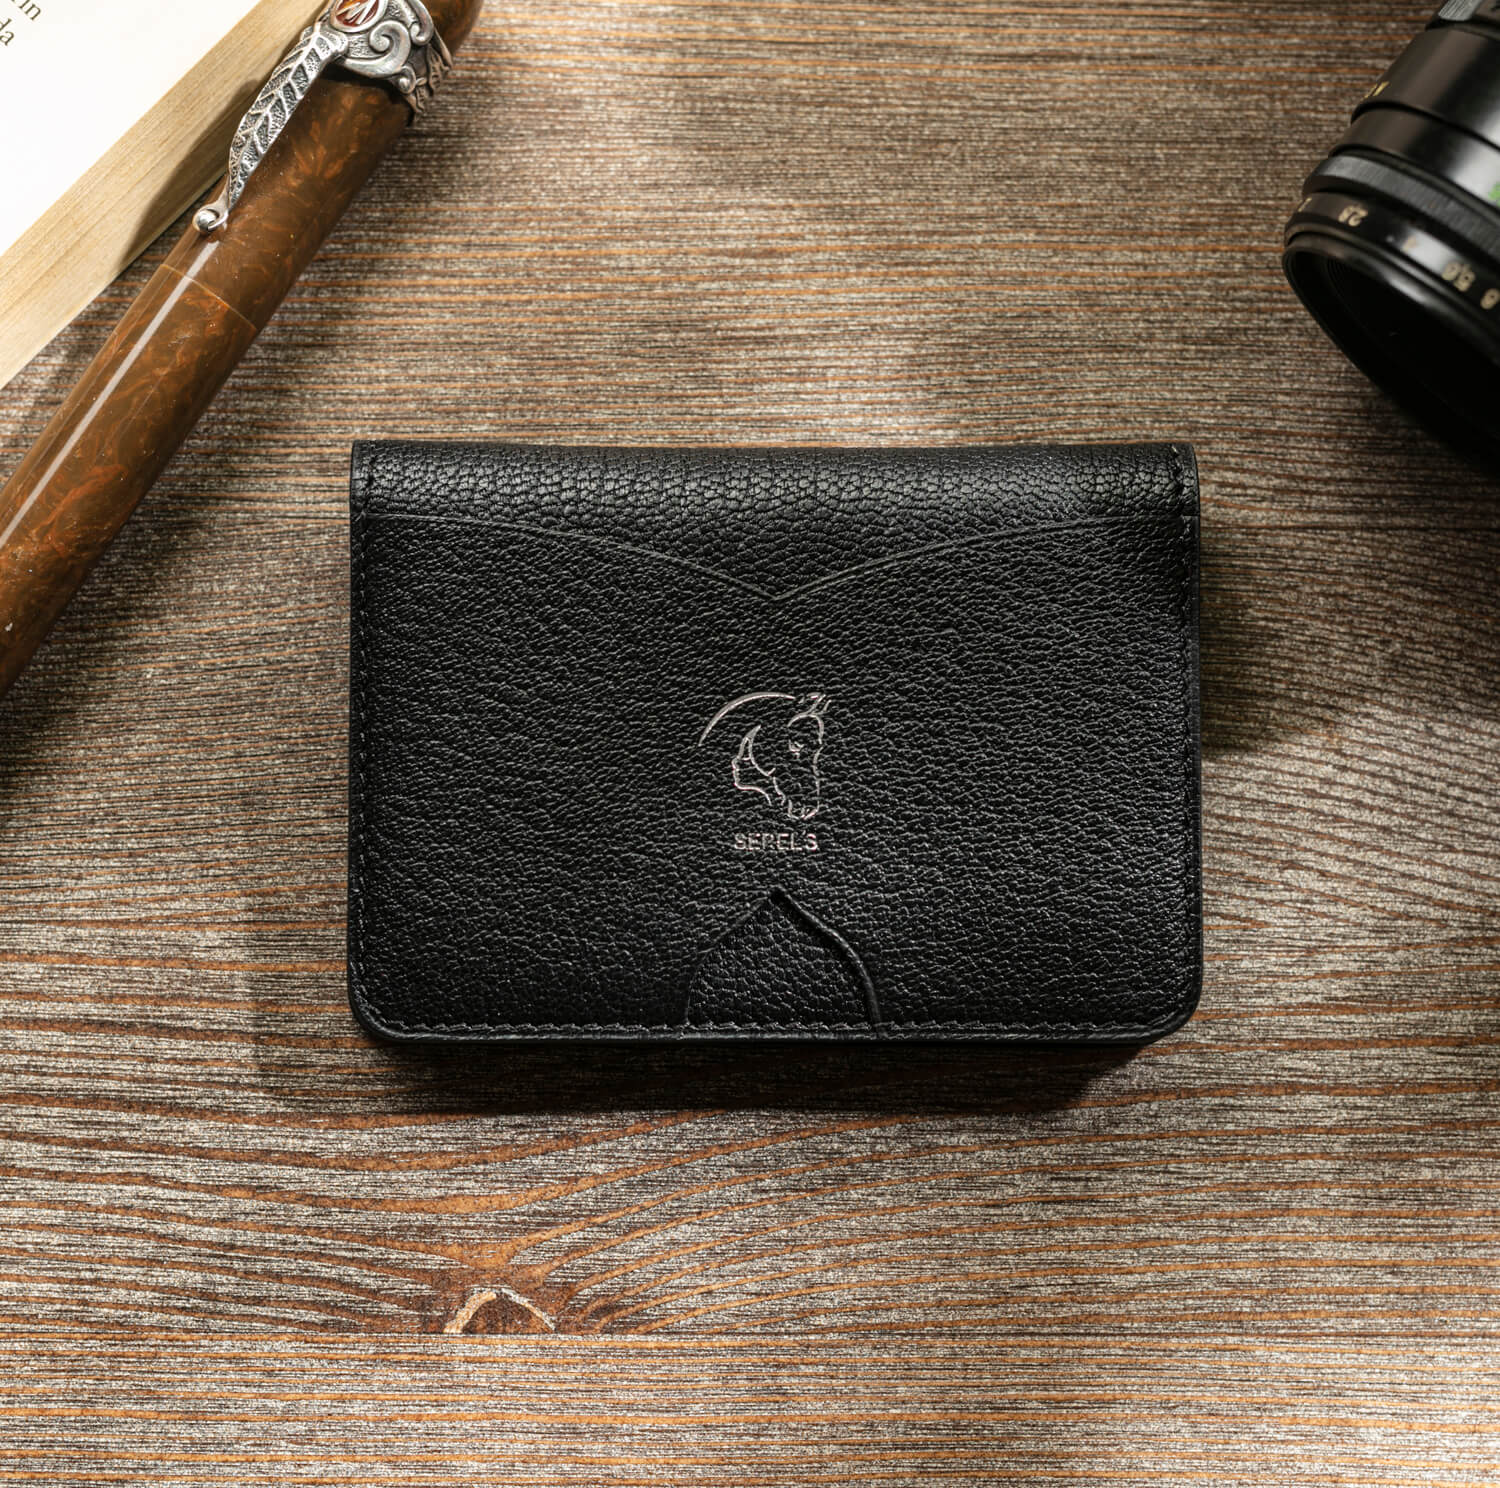 Serel's Gracious Bifold Wallet on the table